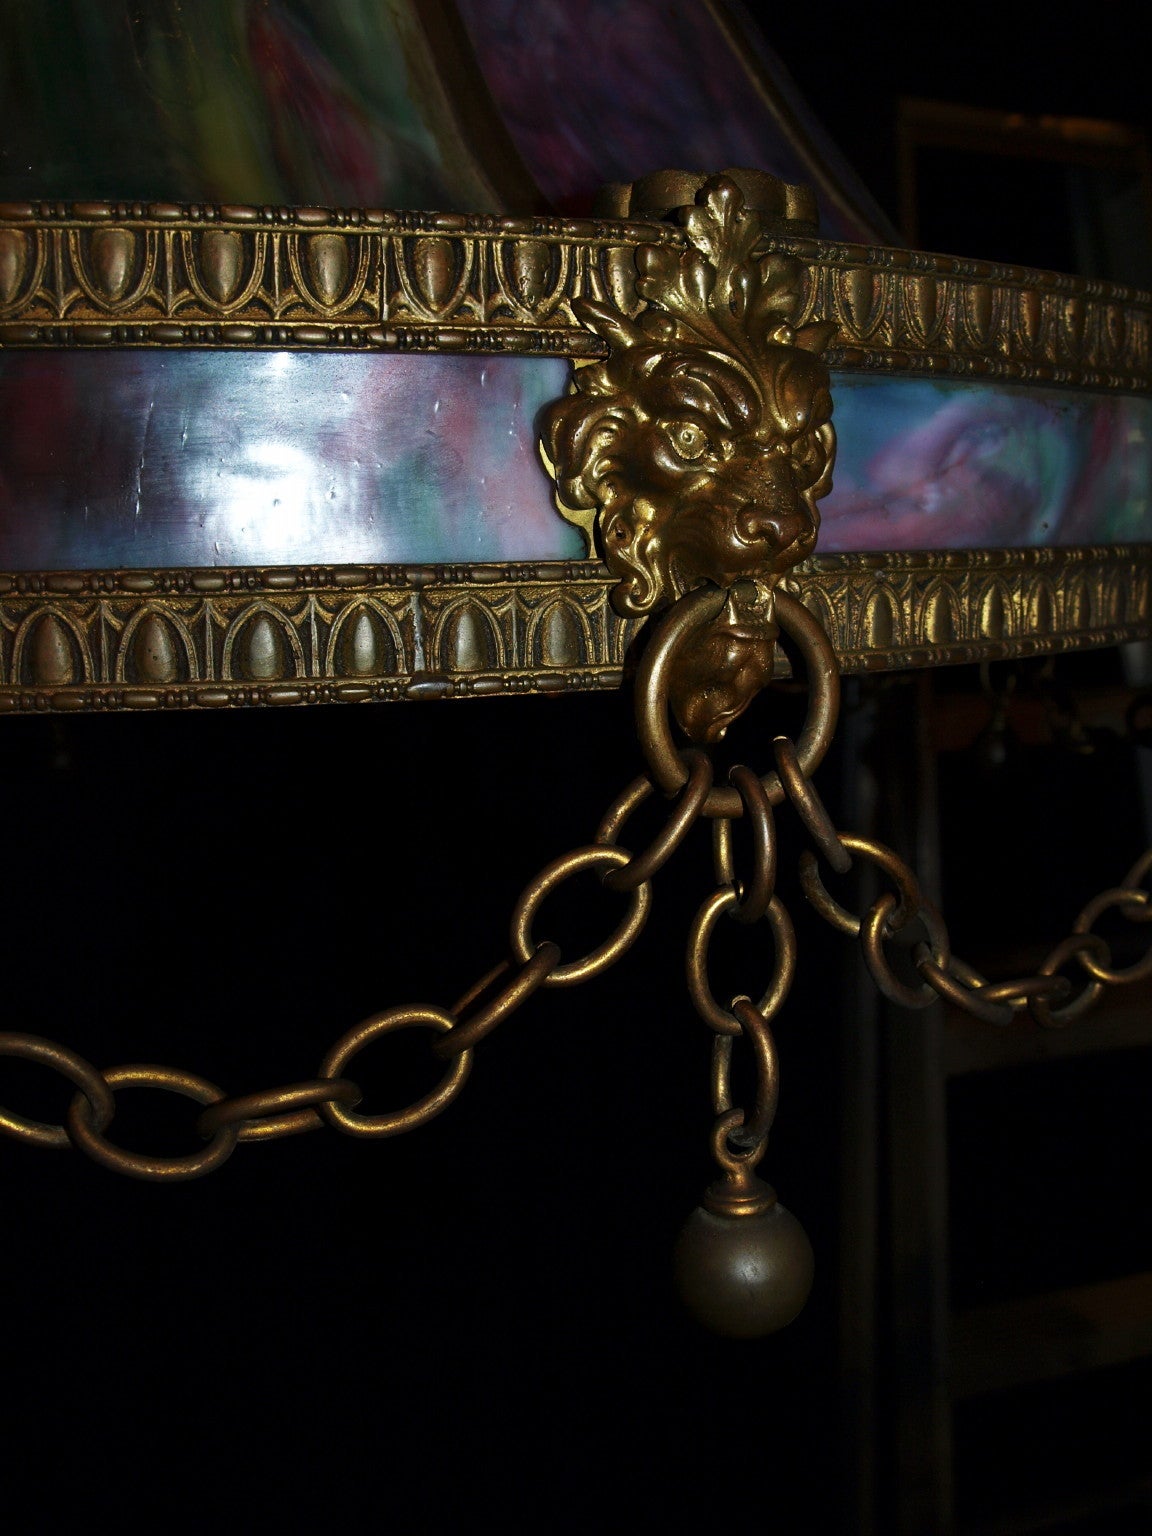 19th Century Antique Chandelier. Stained Glass Lamp